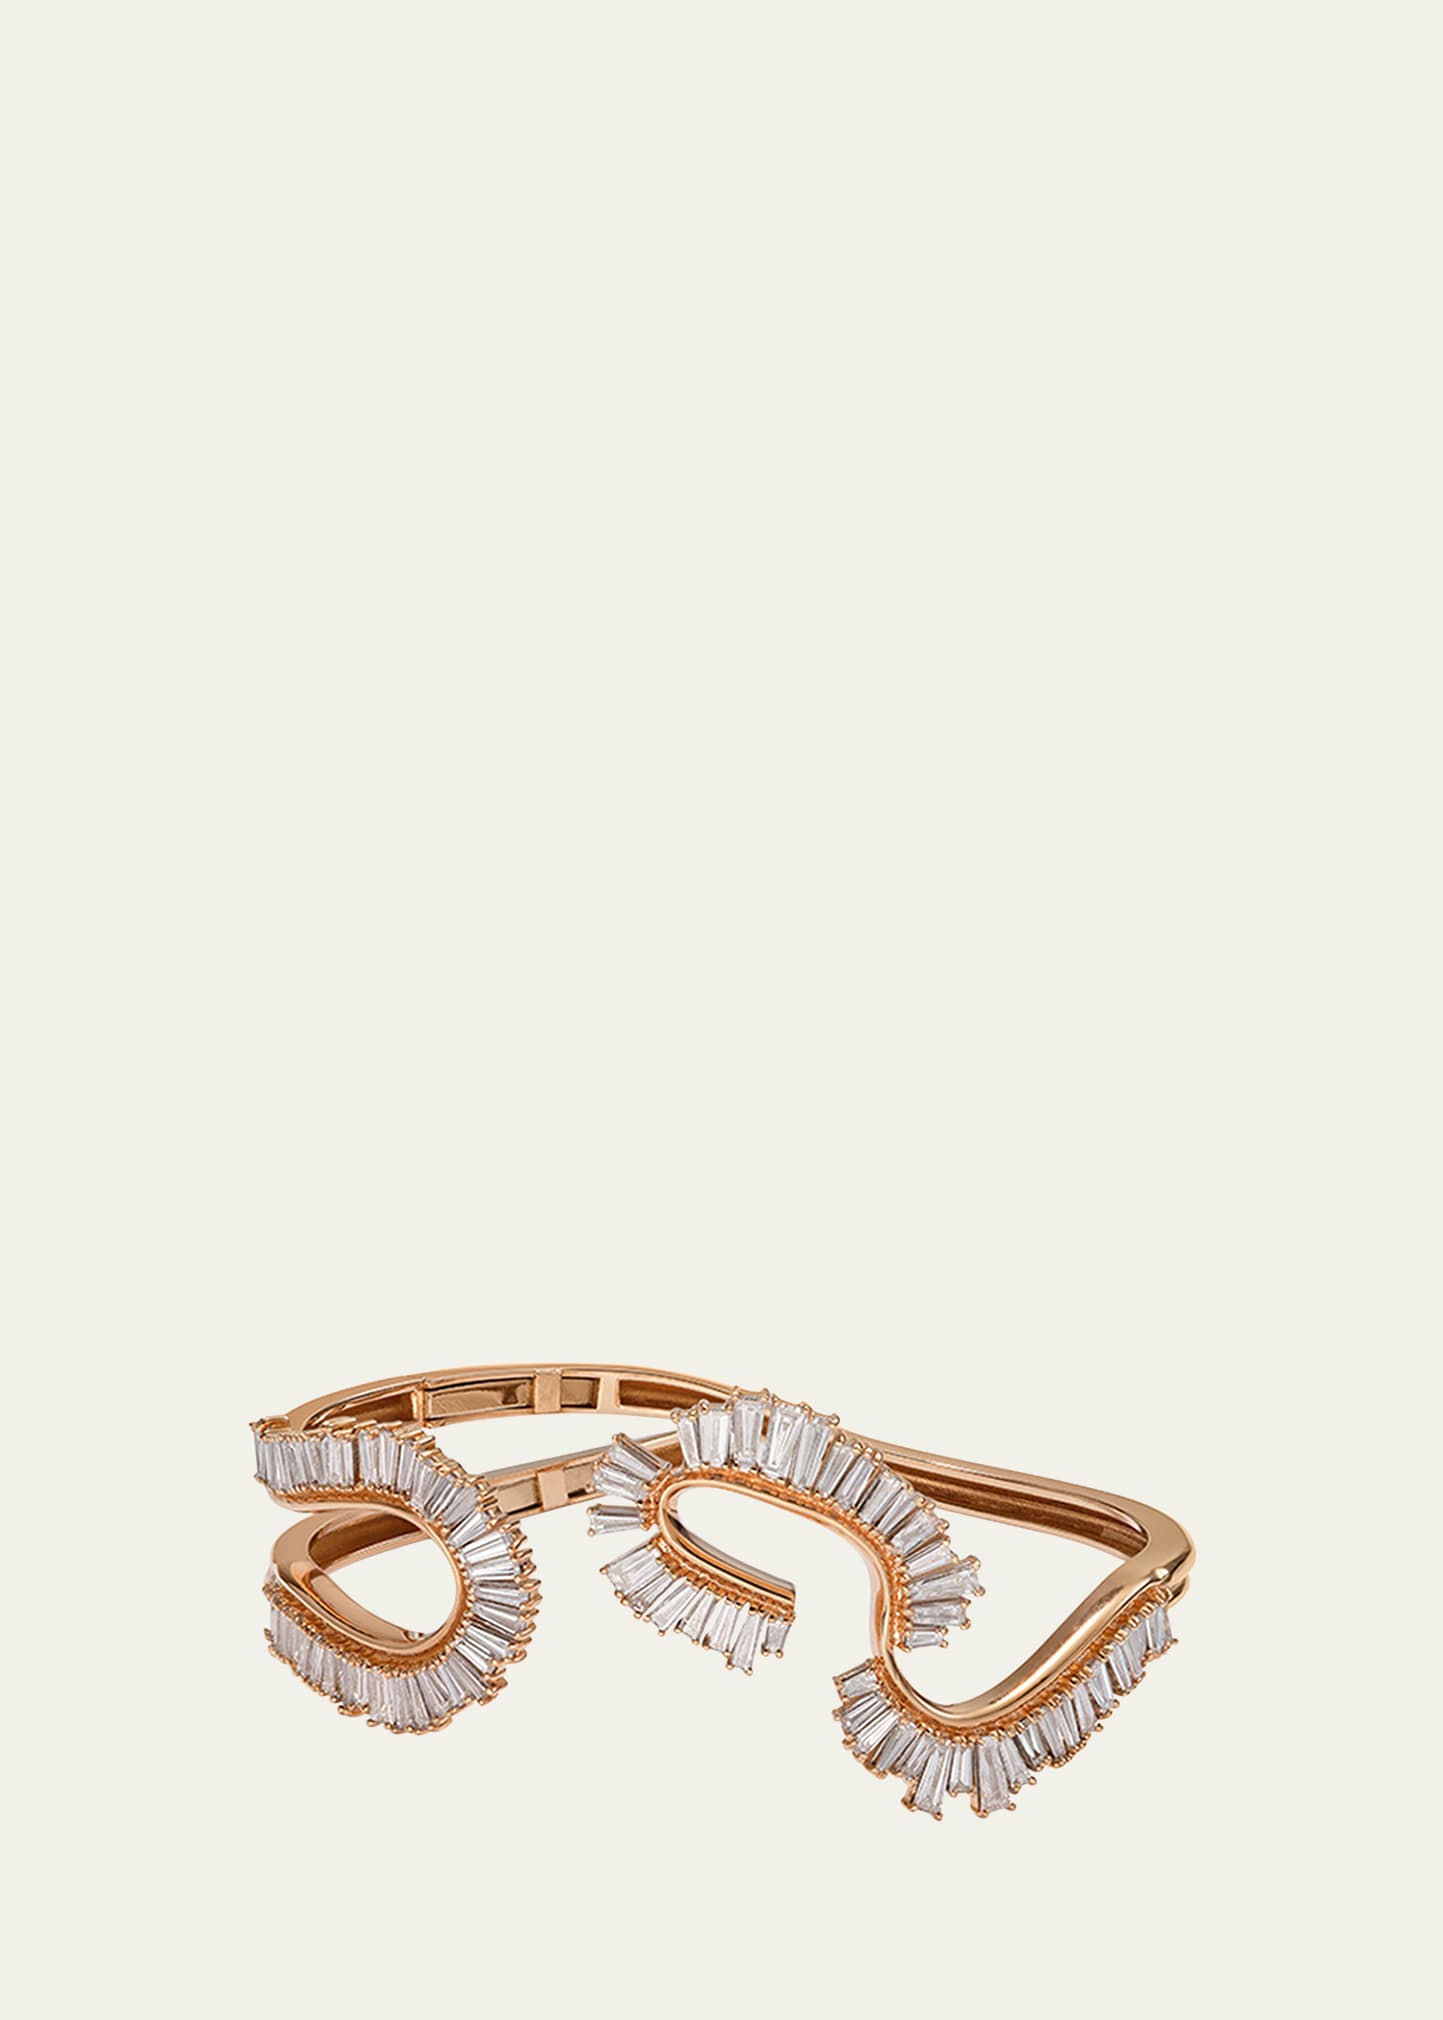 Nak Armstrong 20k Rose Gold Loop And Fringe Cuff Bracelet With Diamonds